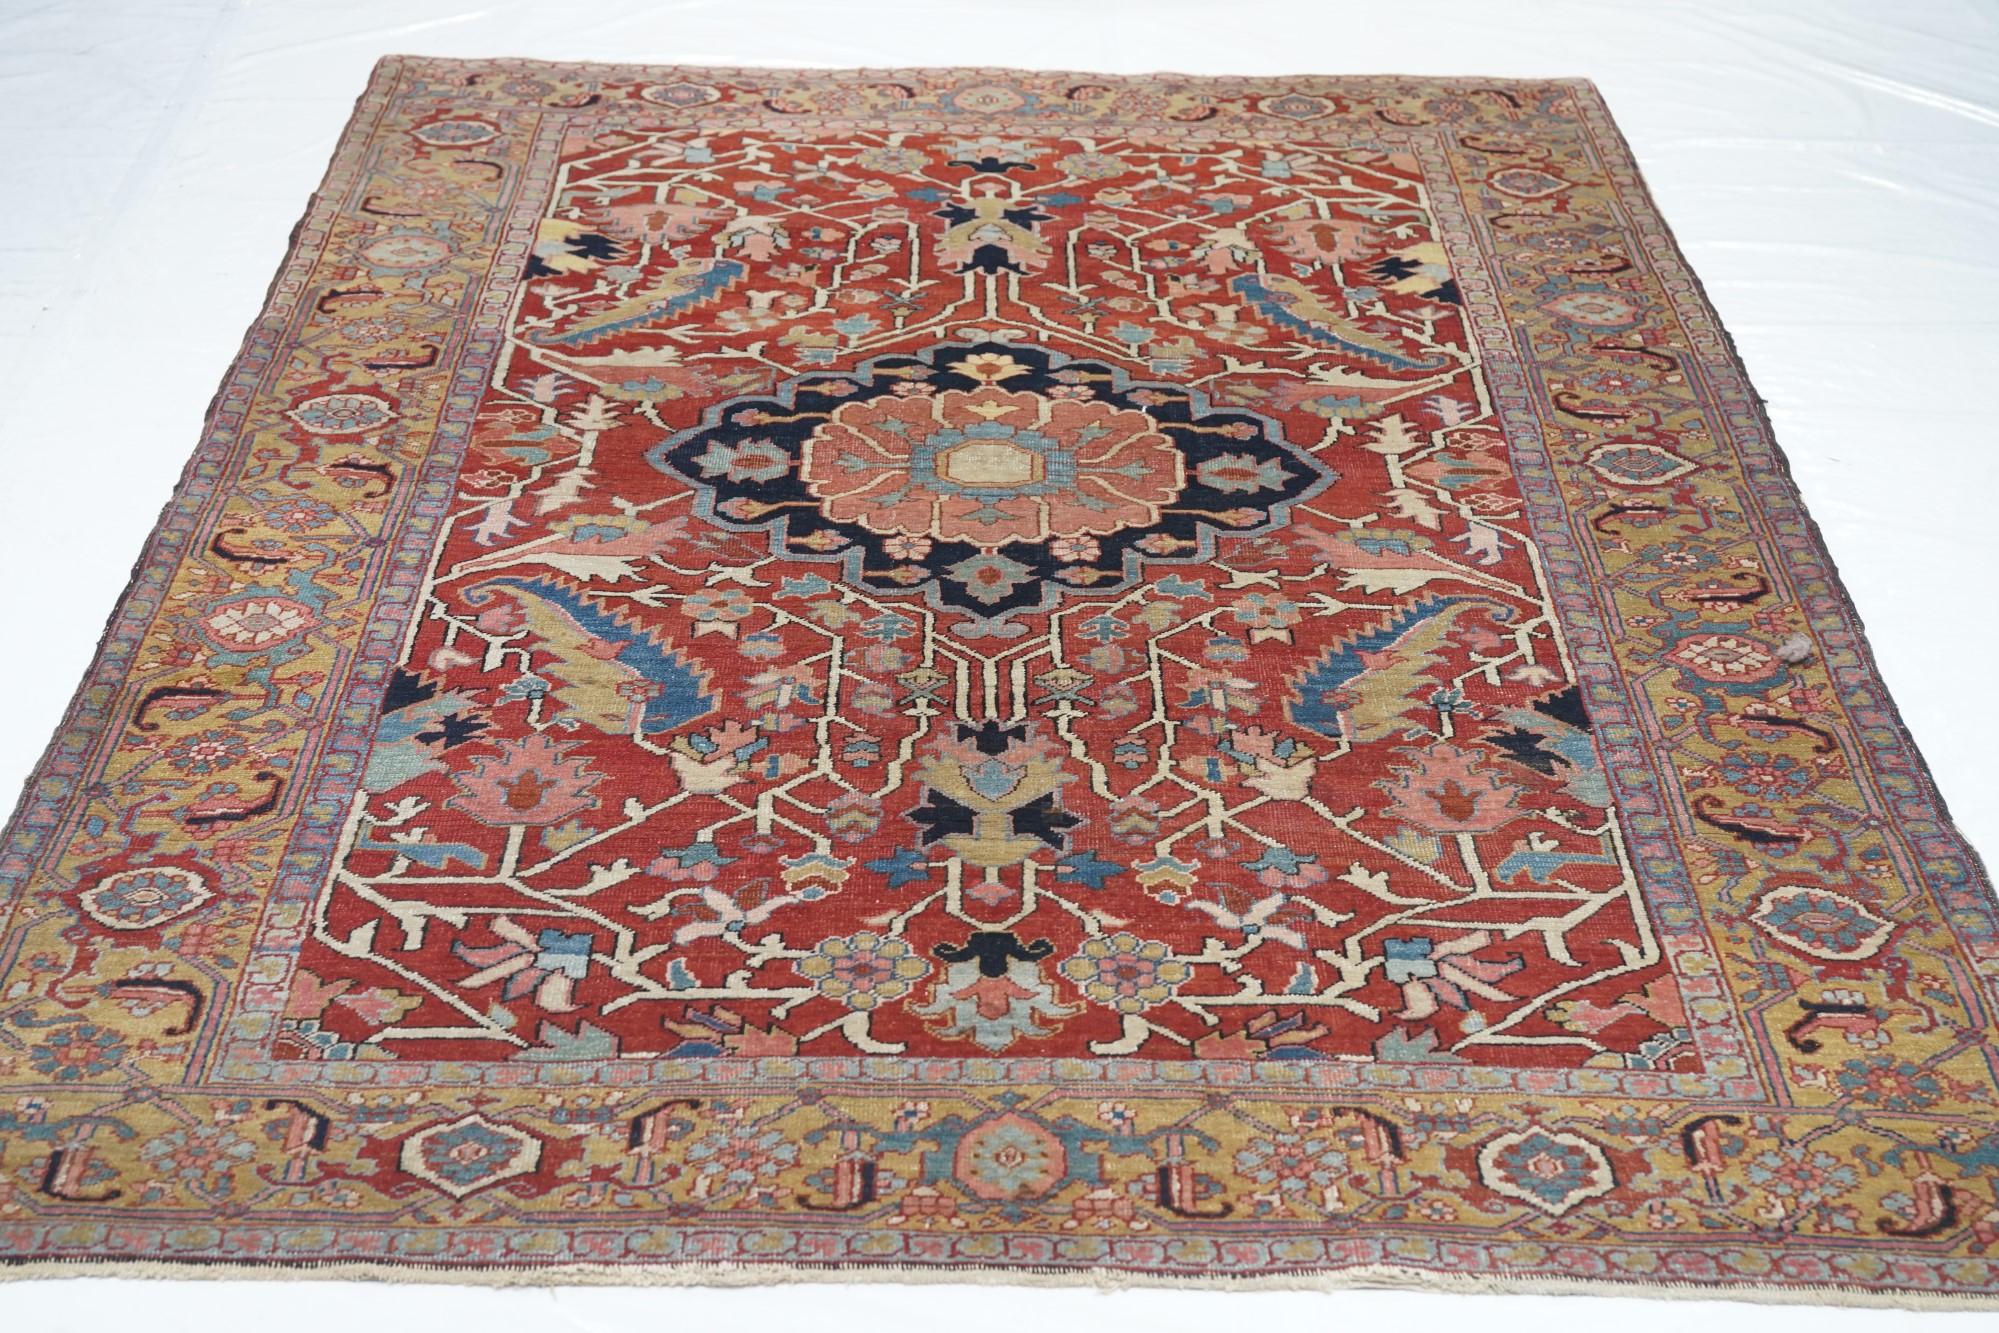 Antique Heriz Rug 5'2'' x 6'10'' In Excellent Condition For Sale In New York, NY